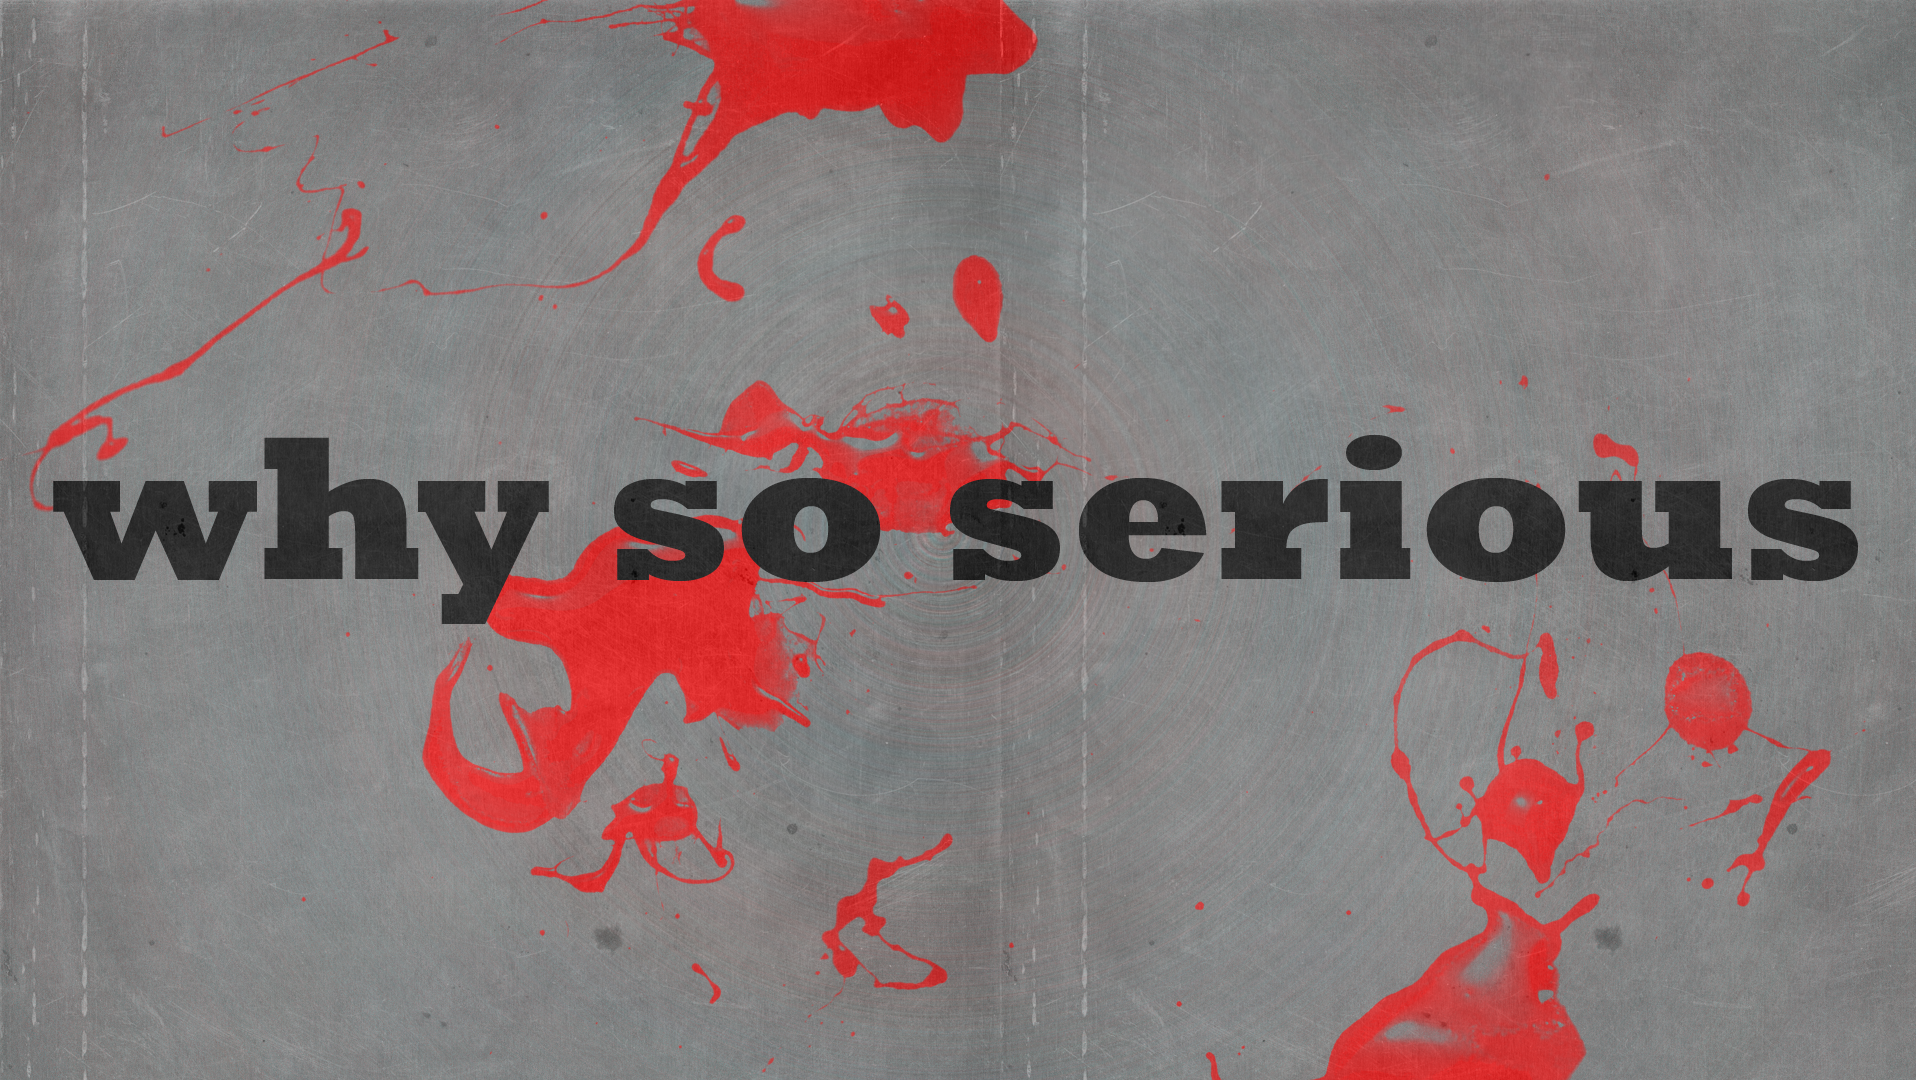 Why So Serious Wallpaper